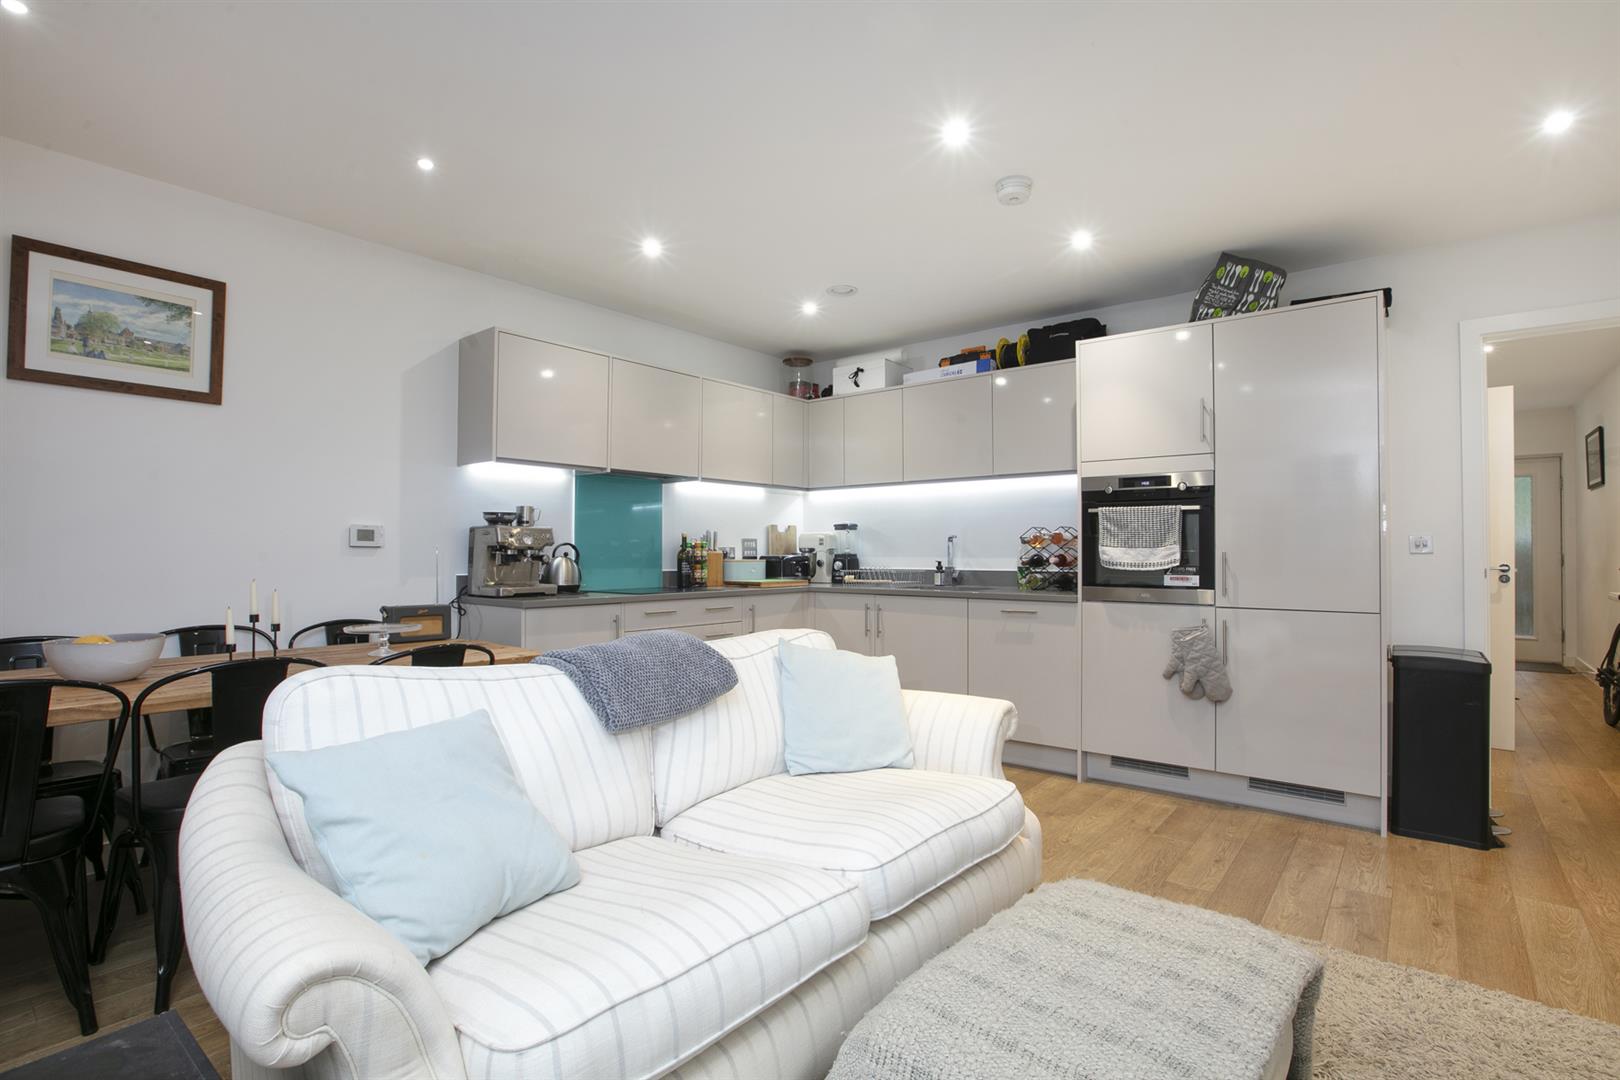 Flat - Purpose Built Under Offer in Horsnell Close, Camberwell, SE5 886 view7